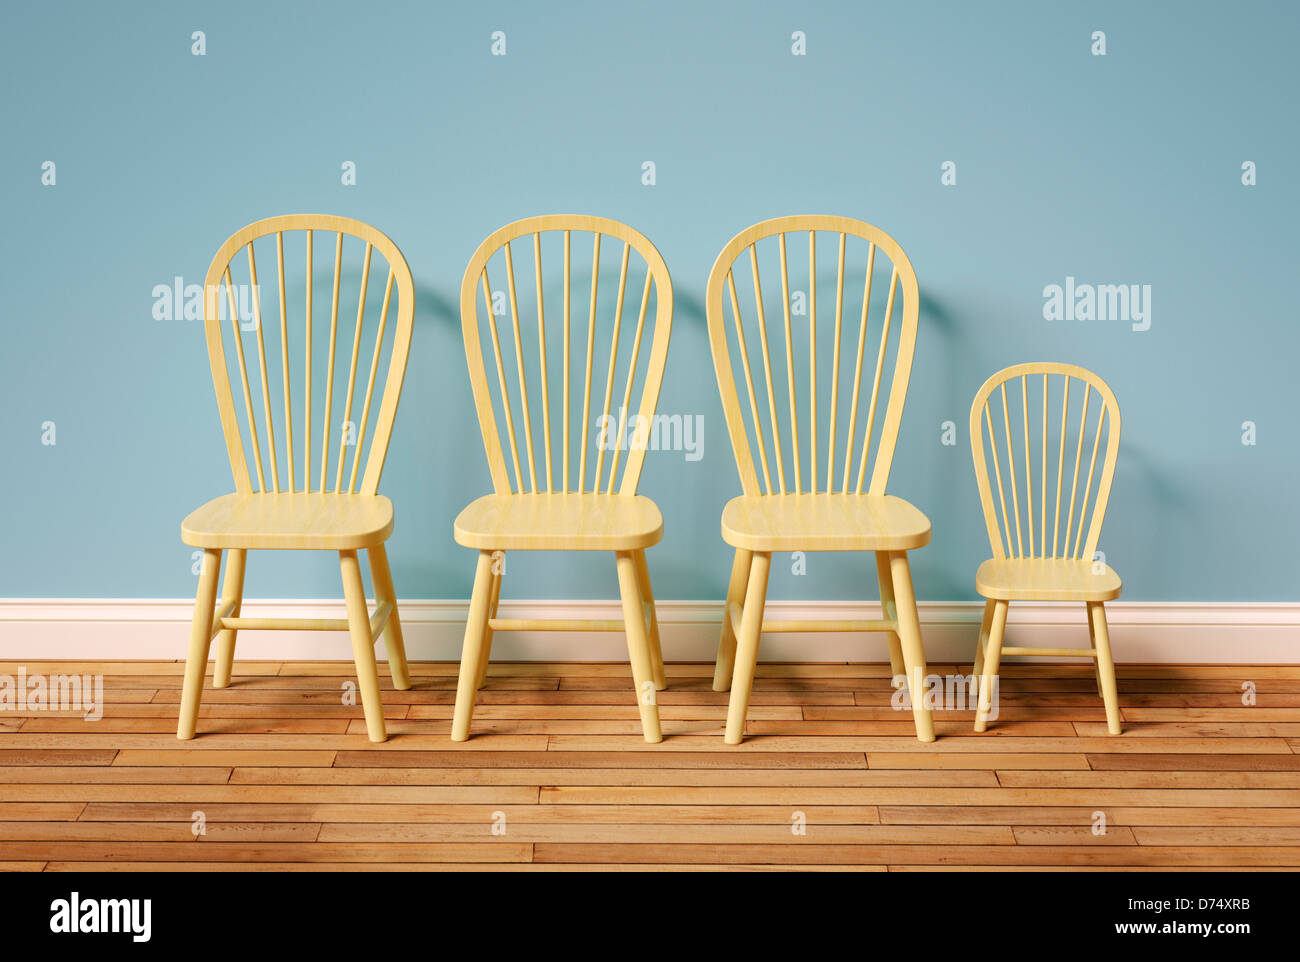 Three large chairs and one small chair in an empty room Stock Photo